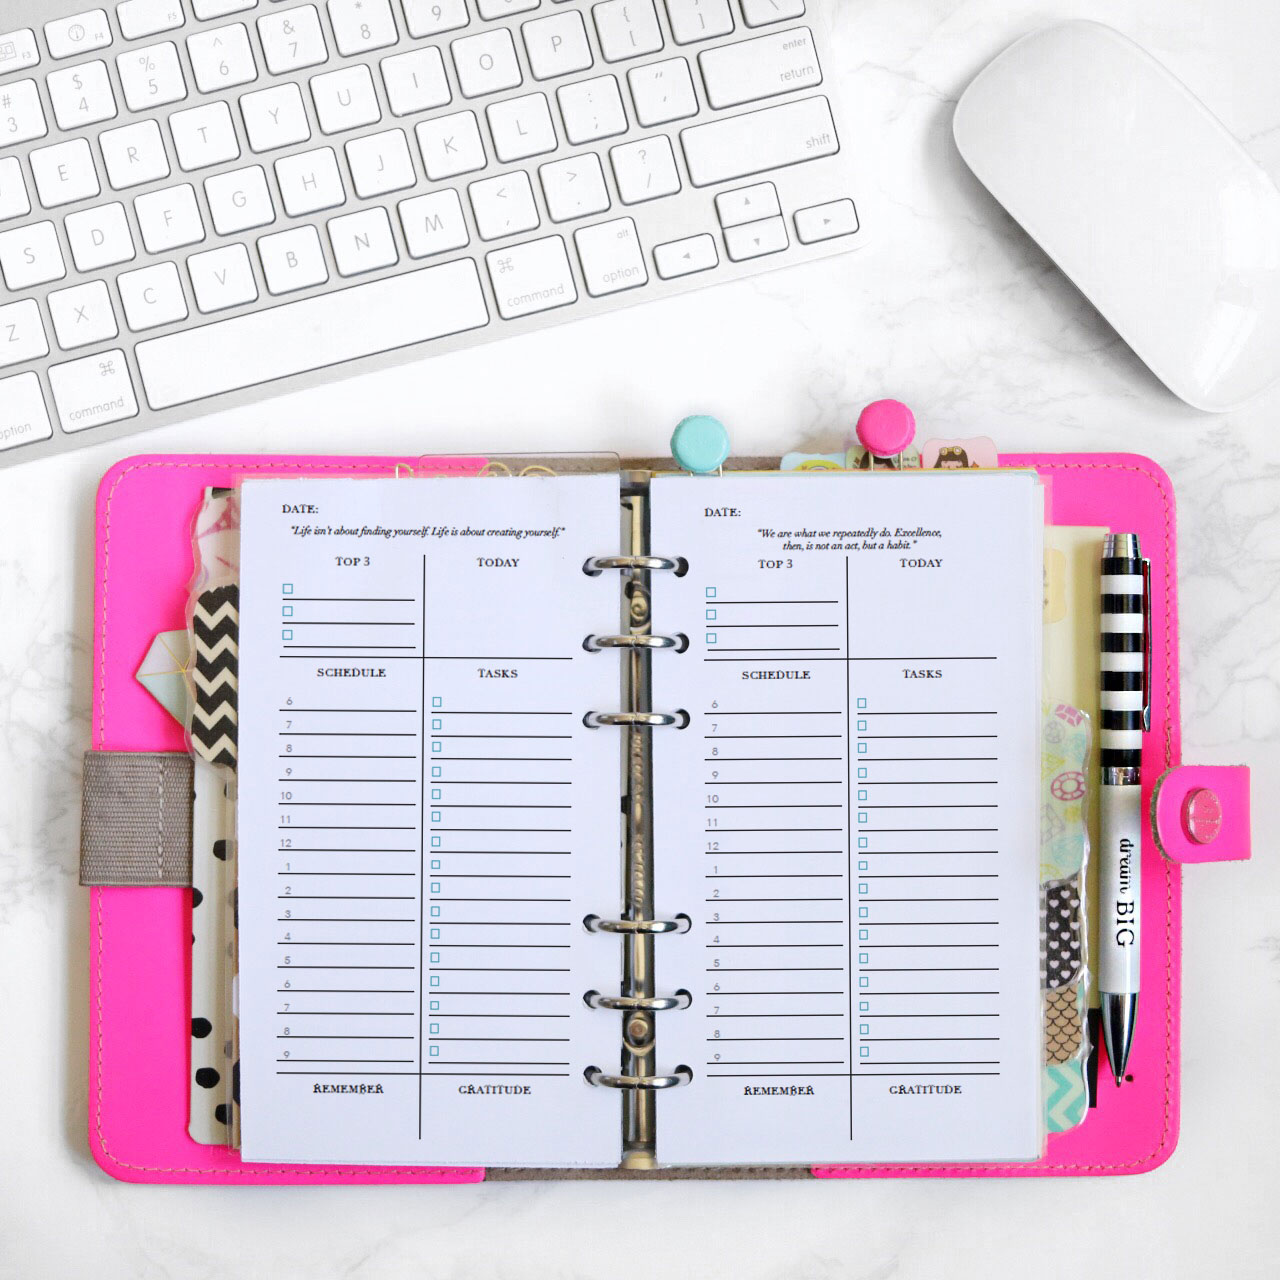 Daily Planner Template   Free Printable Daily Planner for Excel